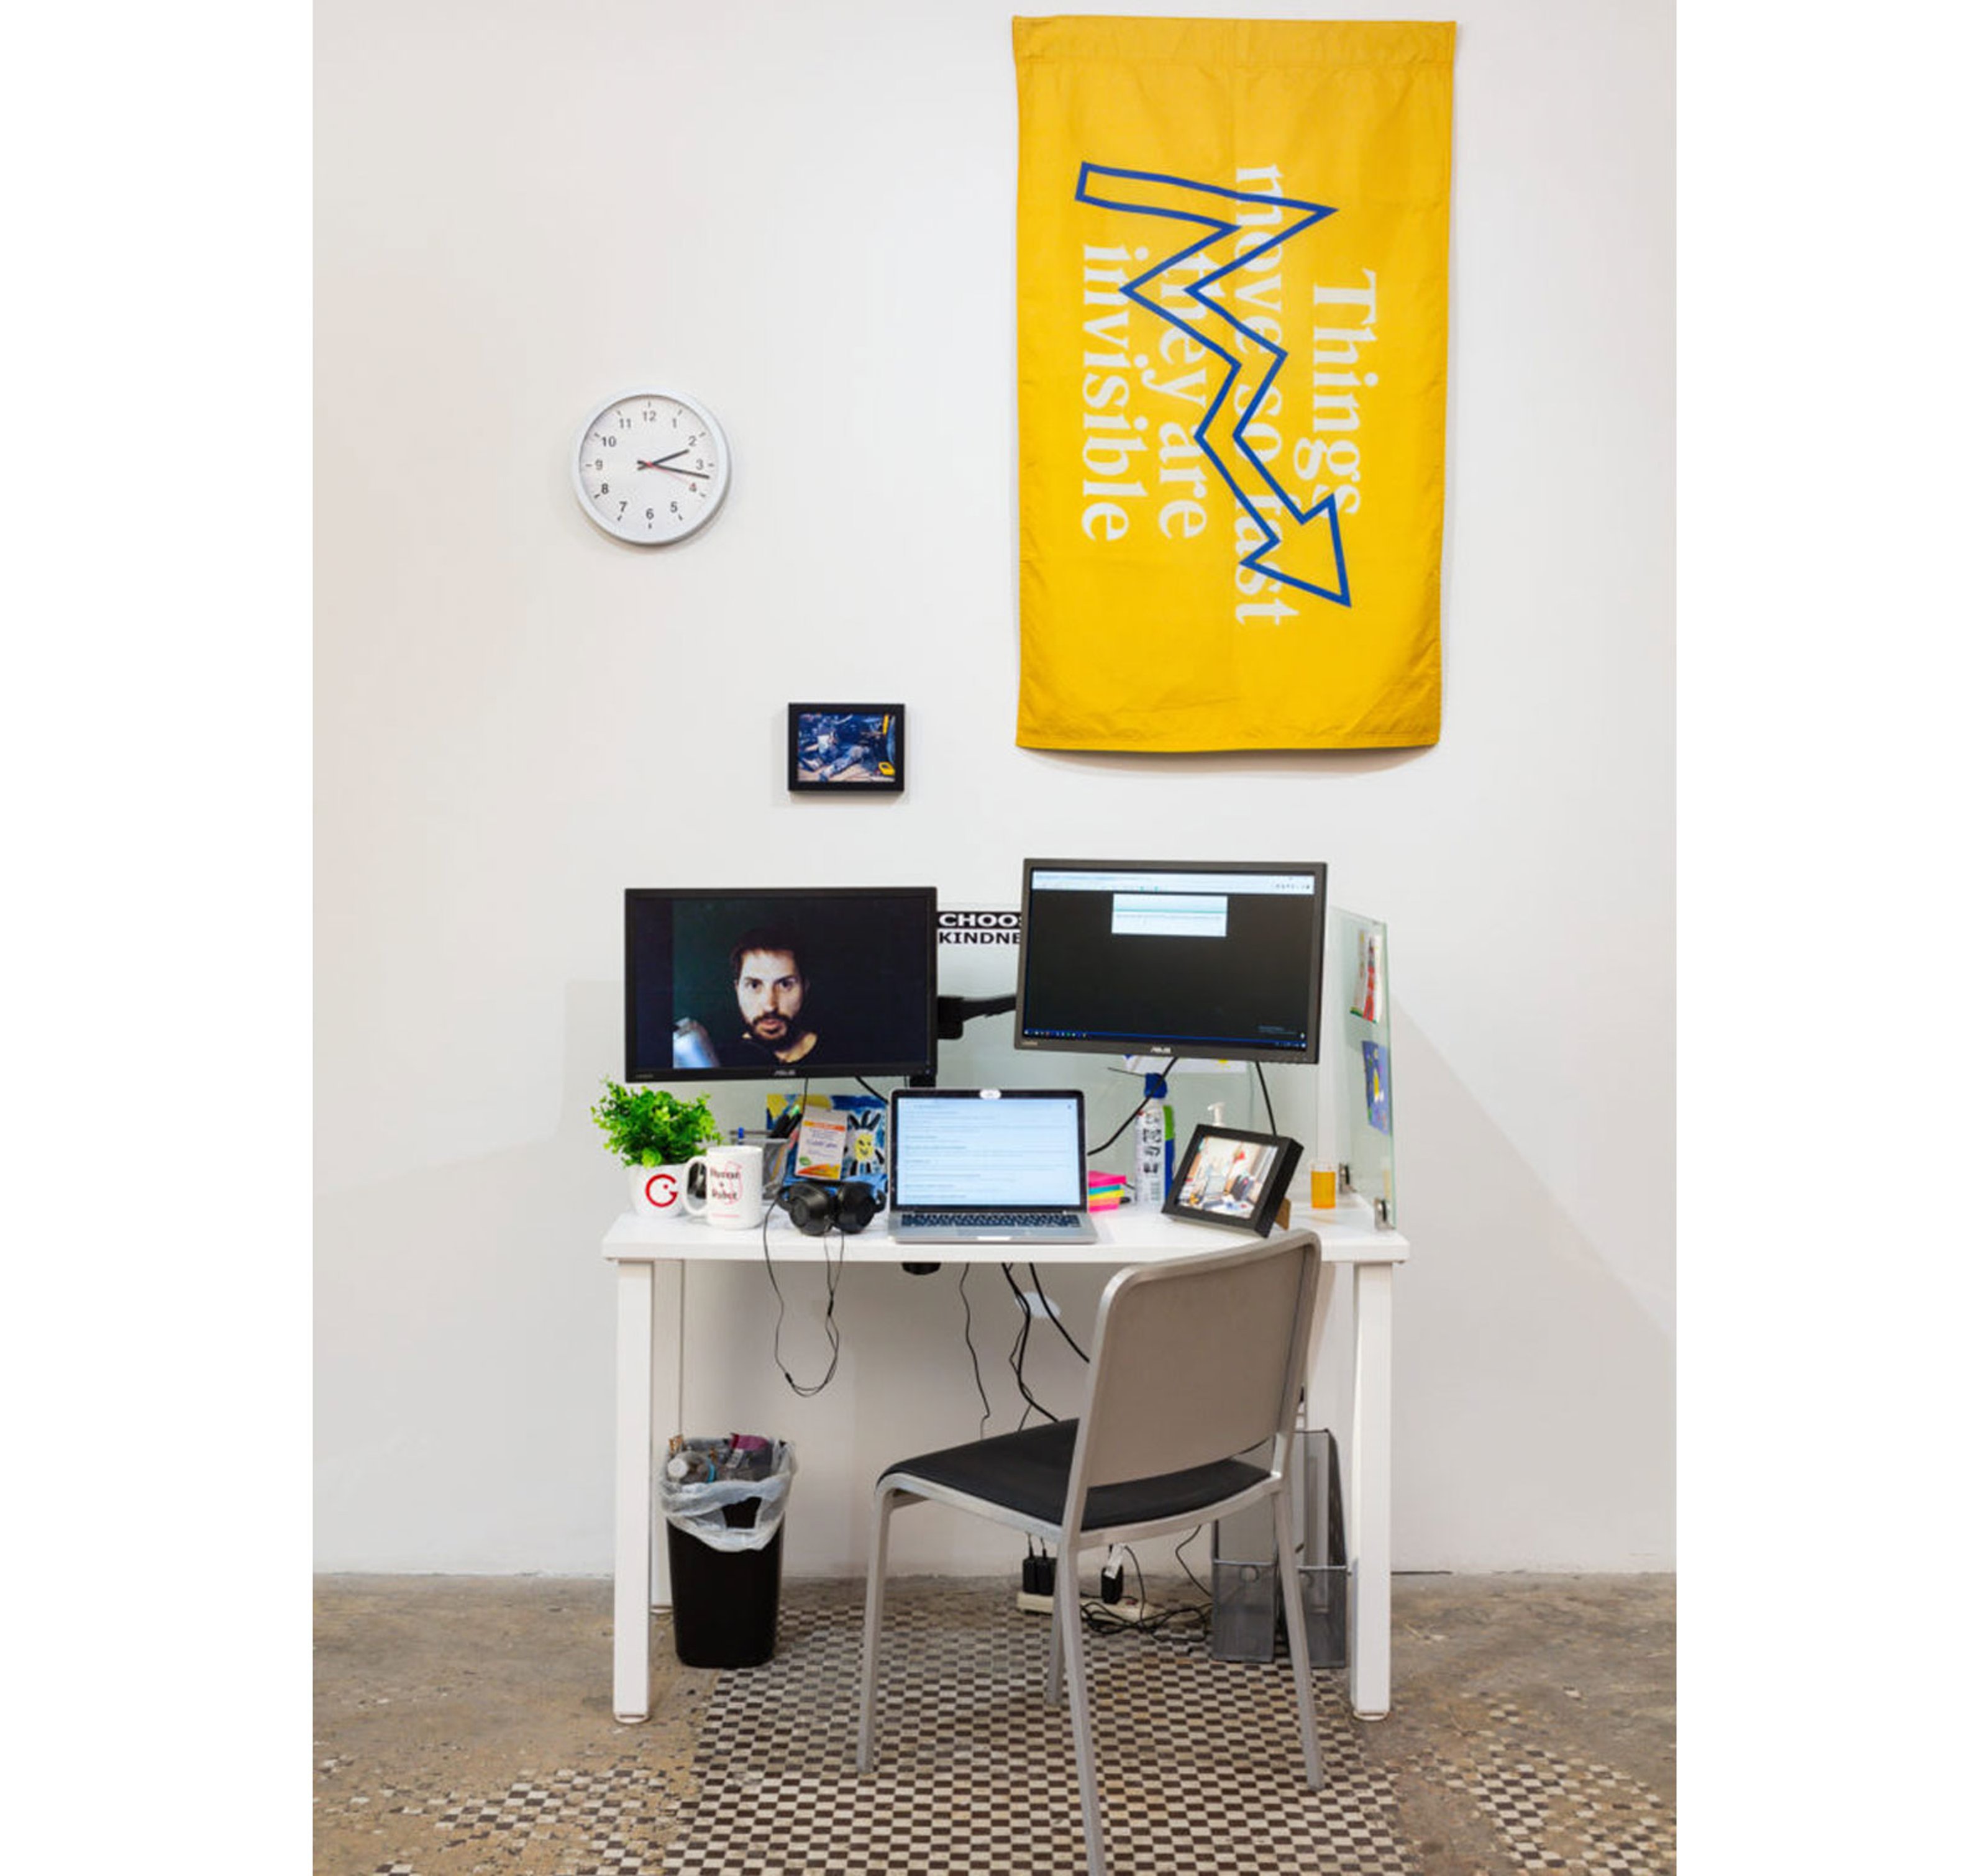 An artwork showing a working table with a laptop and stationary and tapestry on the wall.